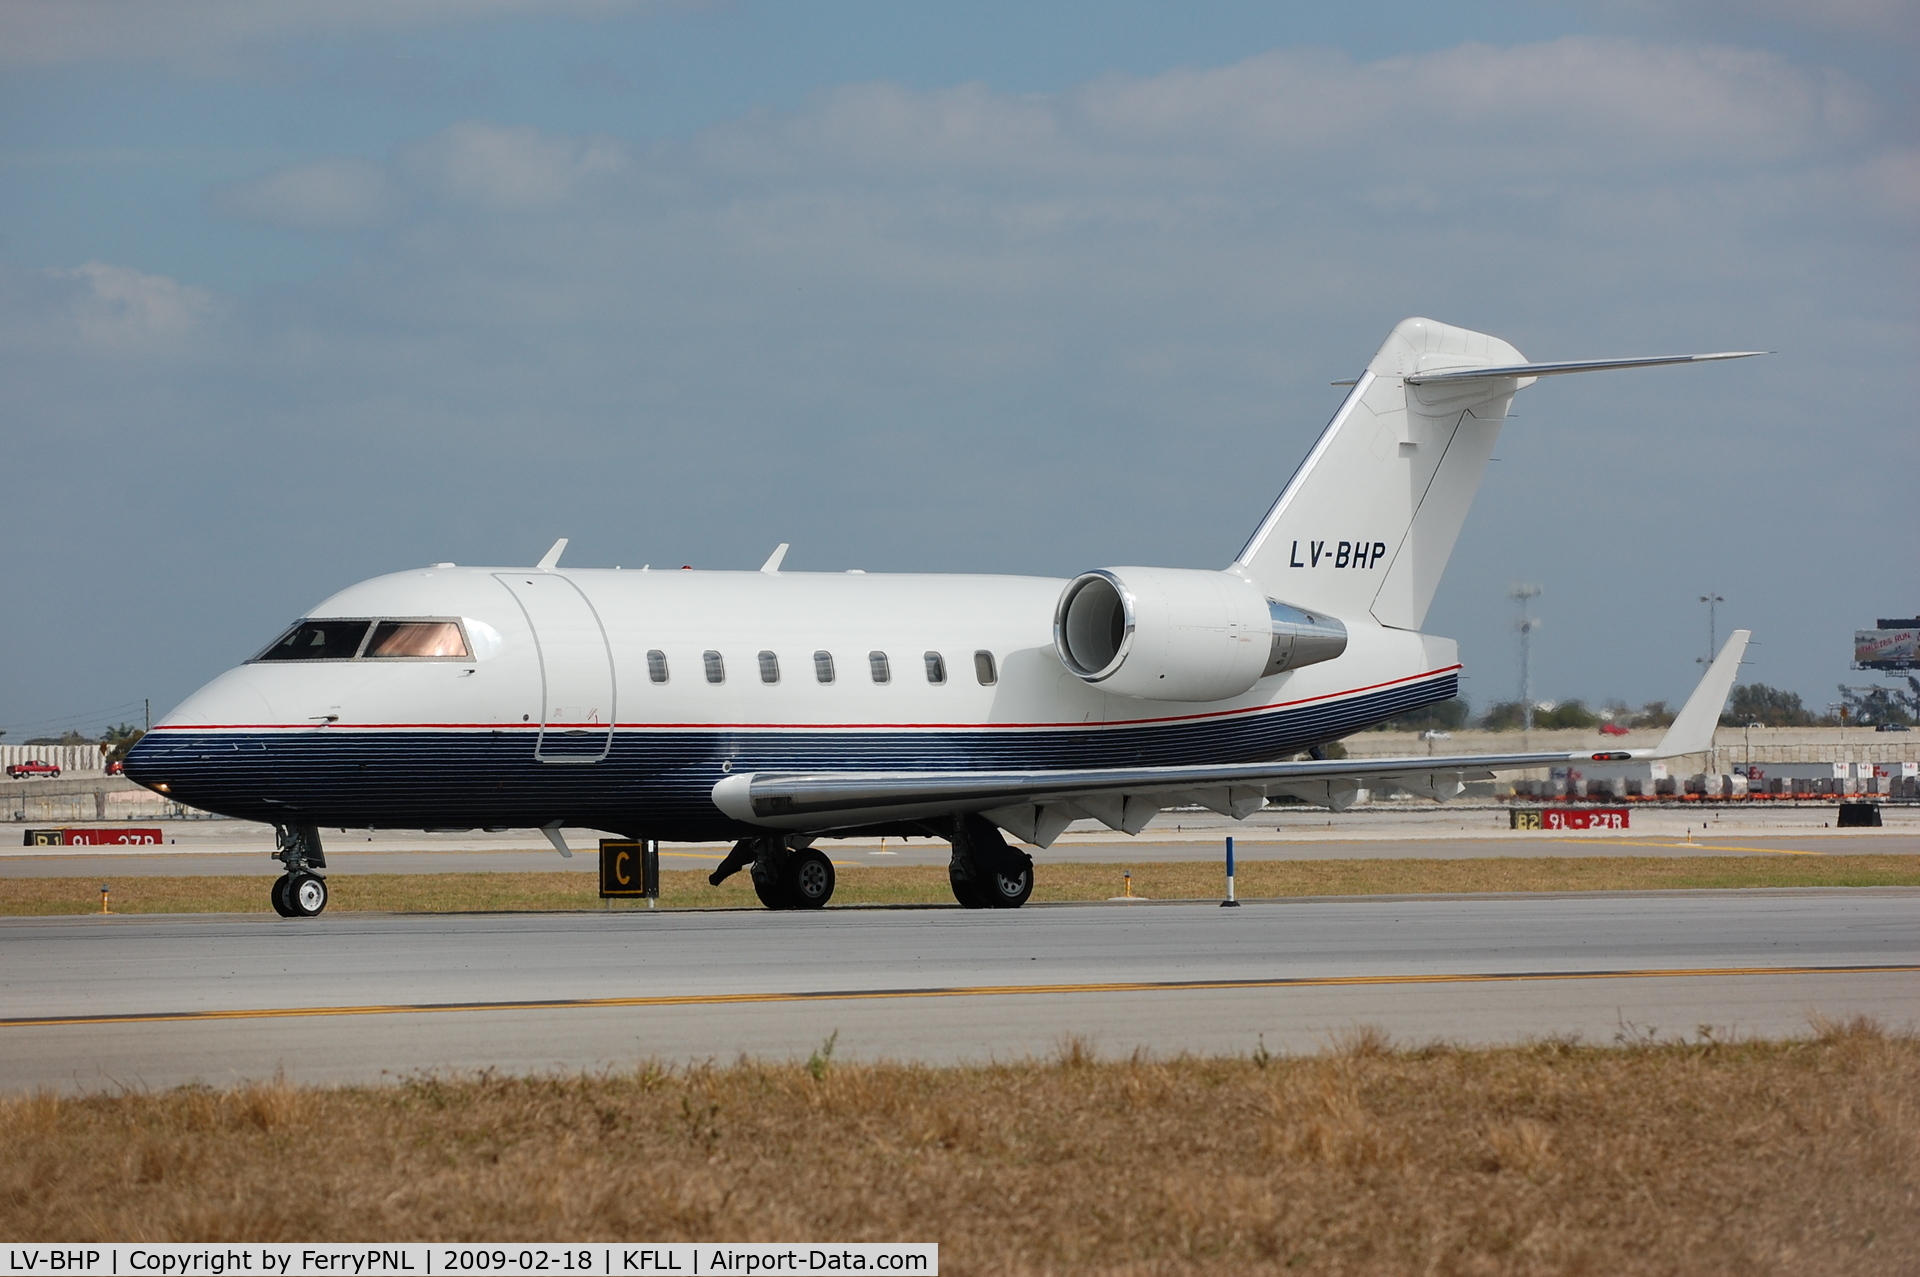 LV-BHP, 2001 Bombardier Challenger 604 (CL-600-2B16) C/N 5493, Challenger 604 from Argentina taxying for take-off from FLL.